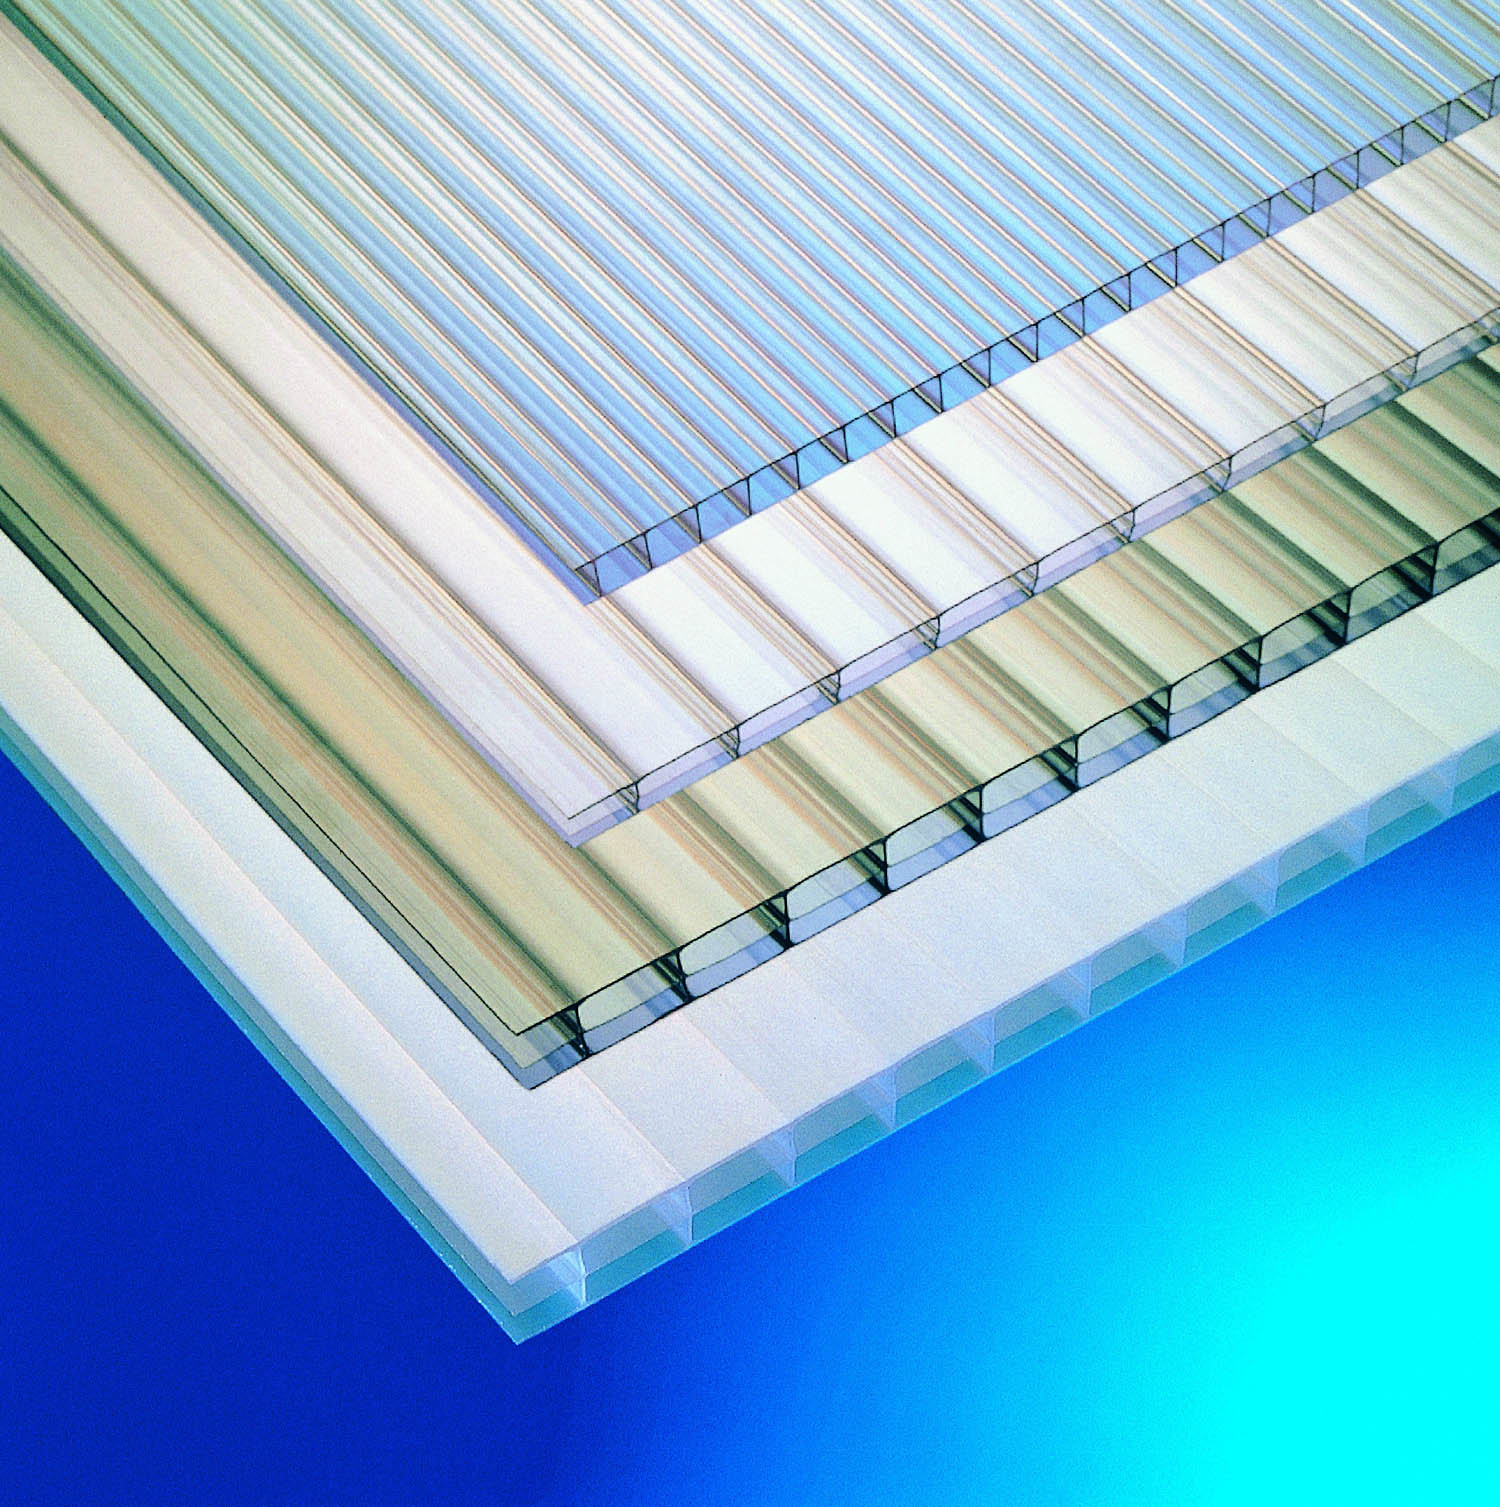 Polycarbonate Roofing Sheets A Few Helpful Tips Edecks Blog